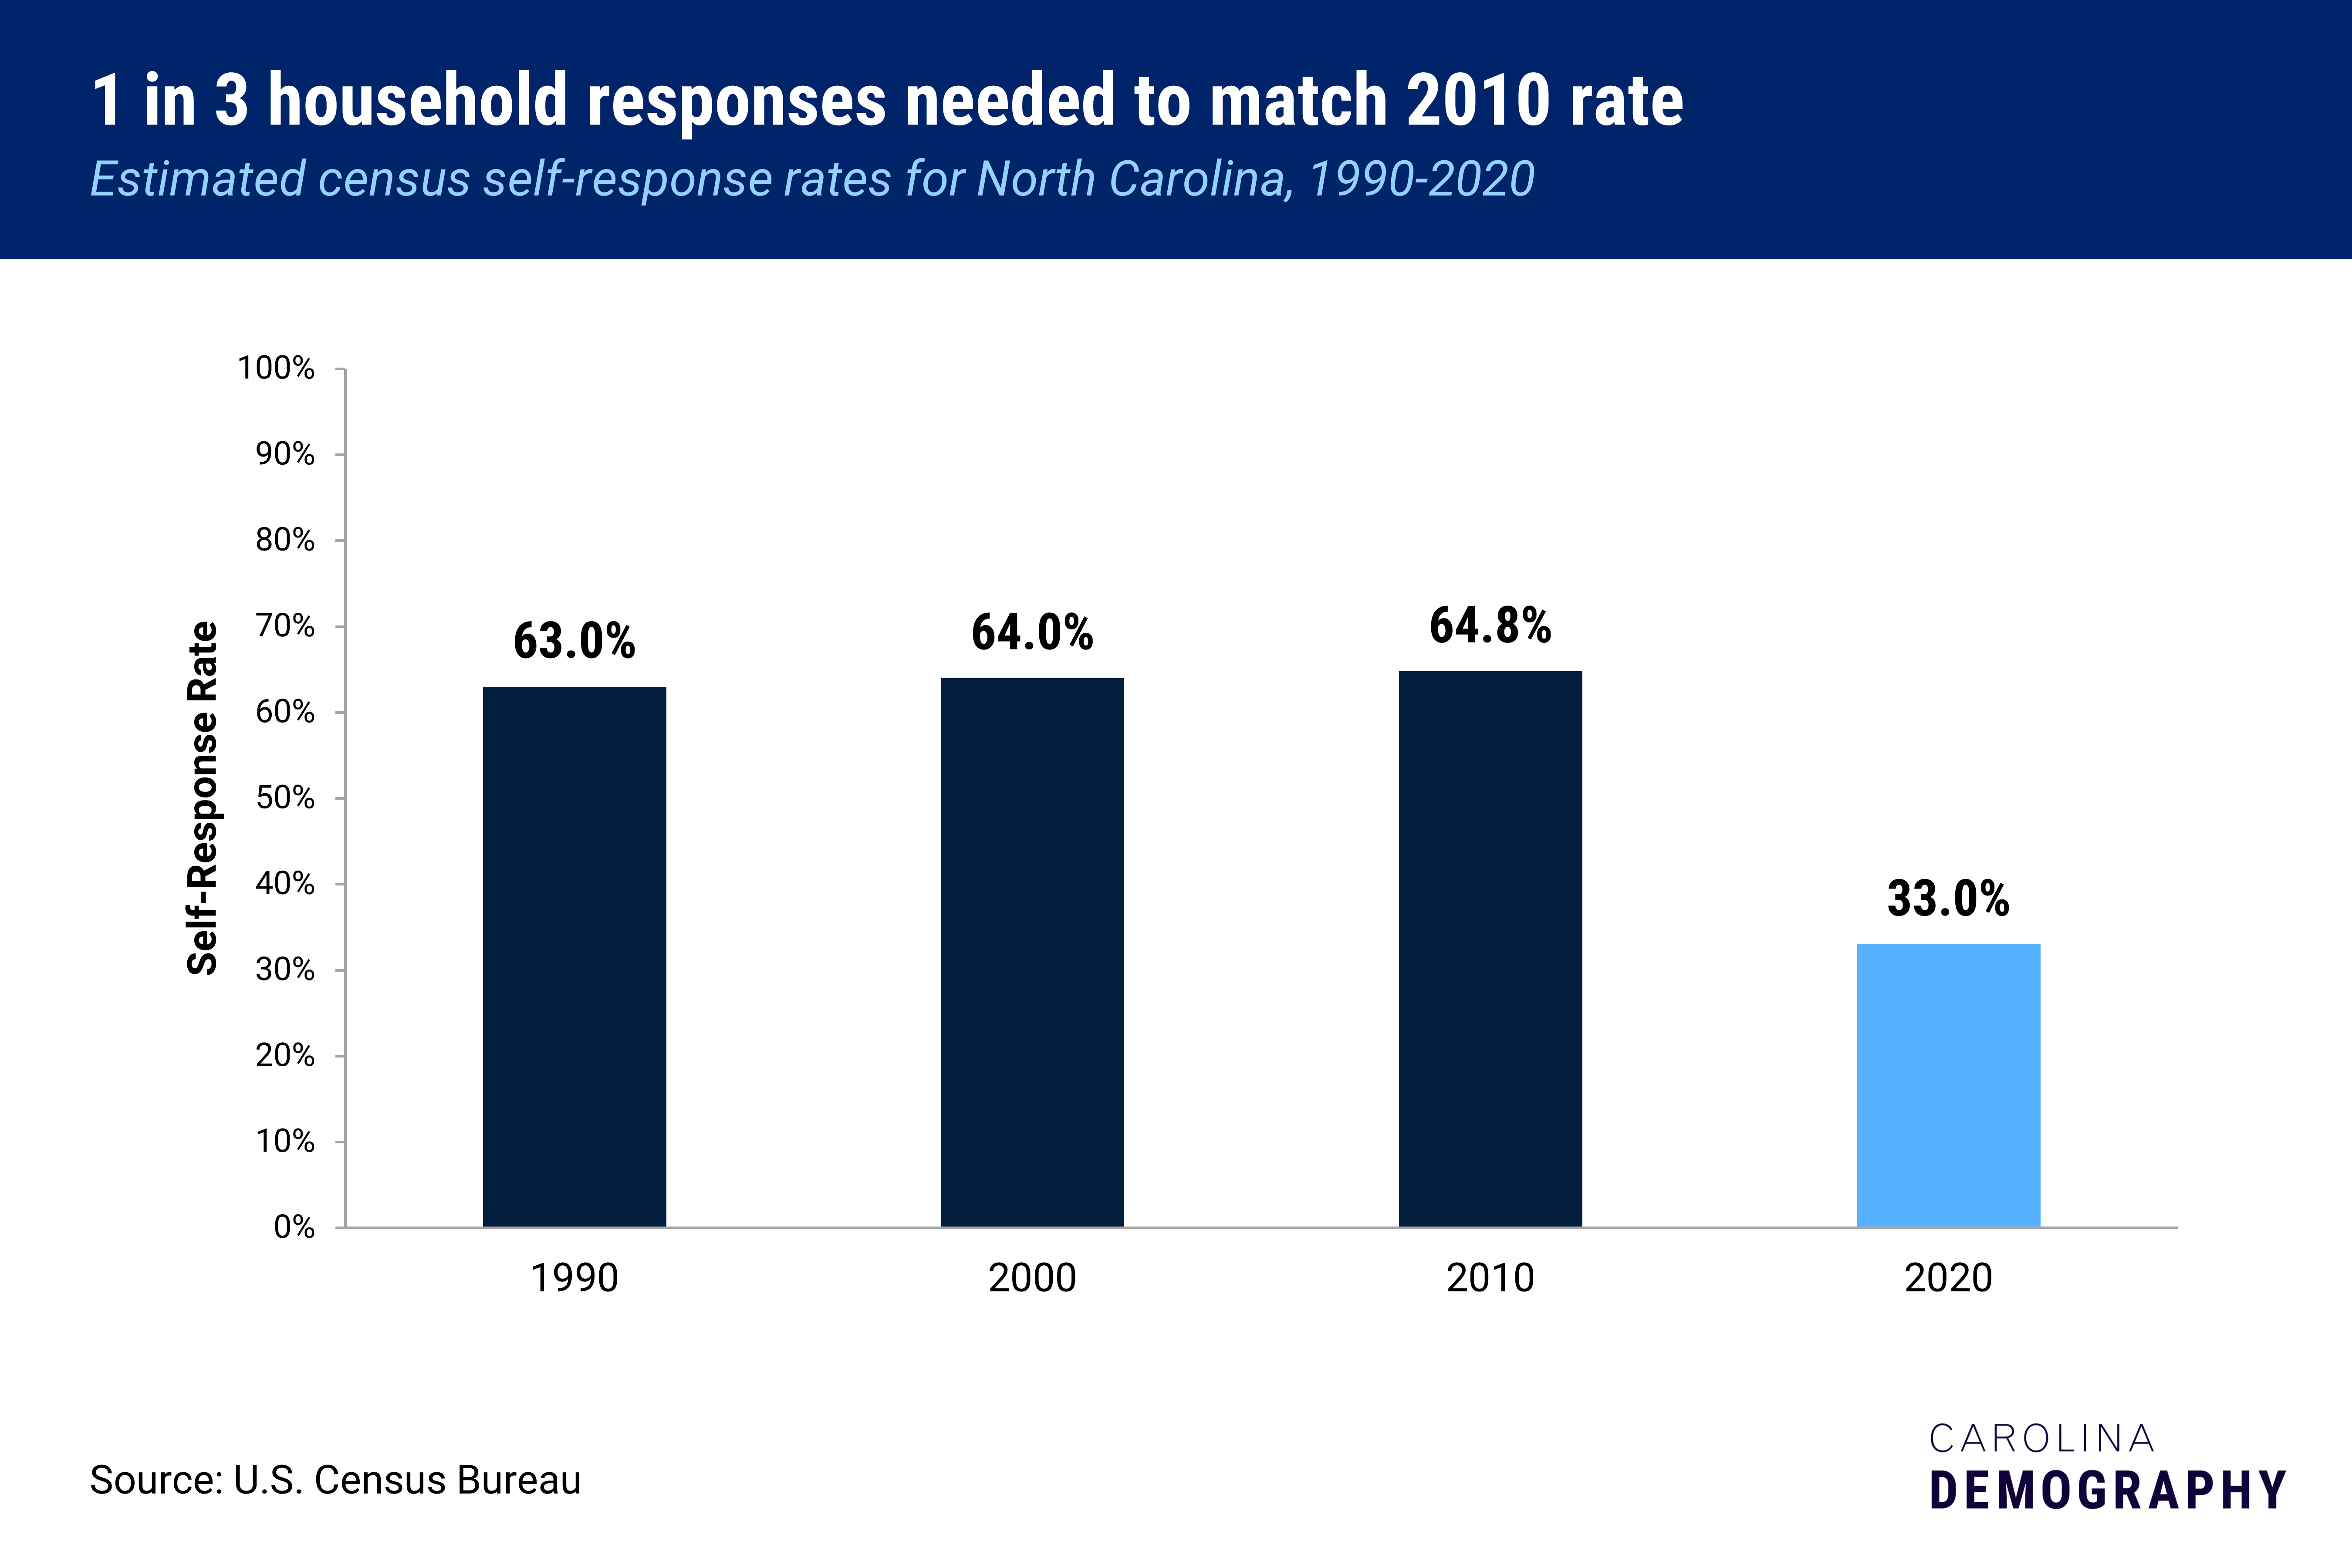 In every decade since 1990, North Carolina has improved its self-response rates: 63% of NC households self-responded in 1990. This increased by a percentage point to 64% in 2000 and increased to 64.8% in 2010. Another 31.8% of NC households need to respond to match the 2010 rates.